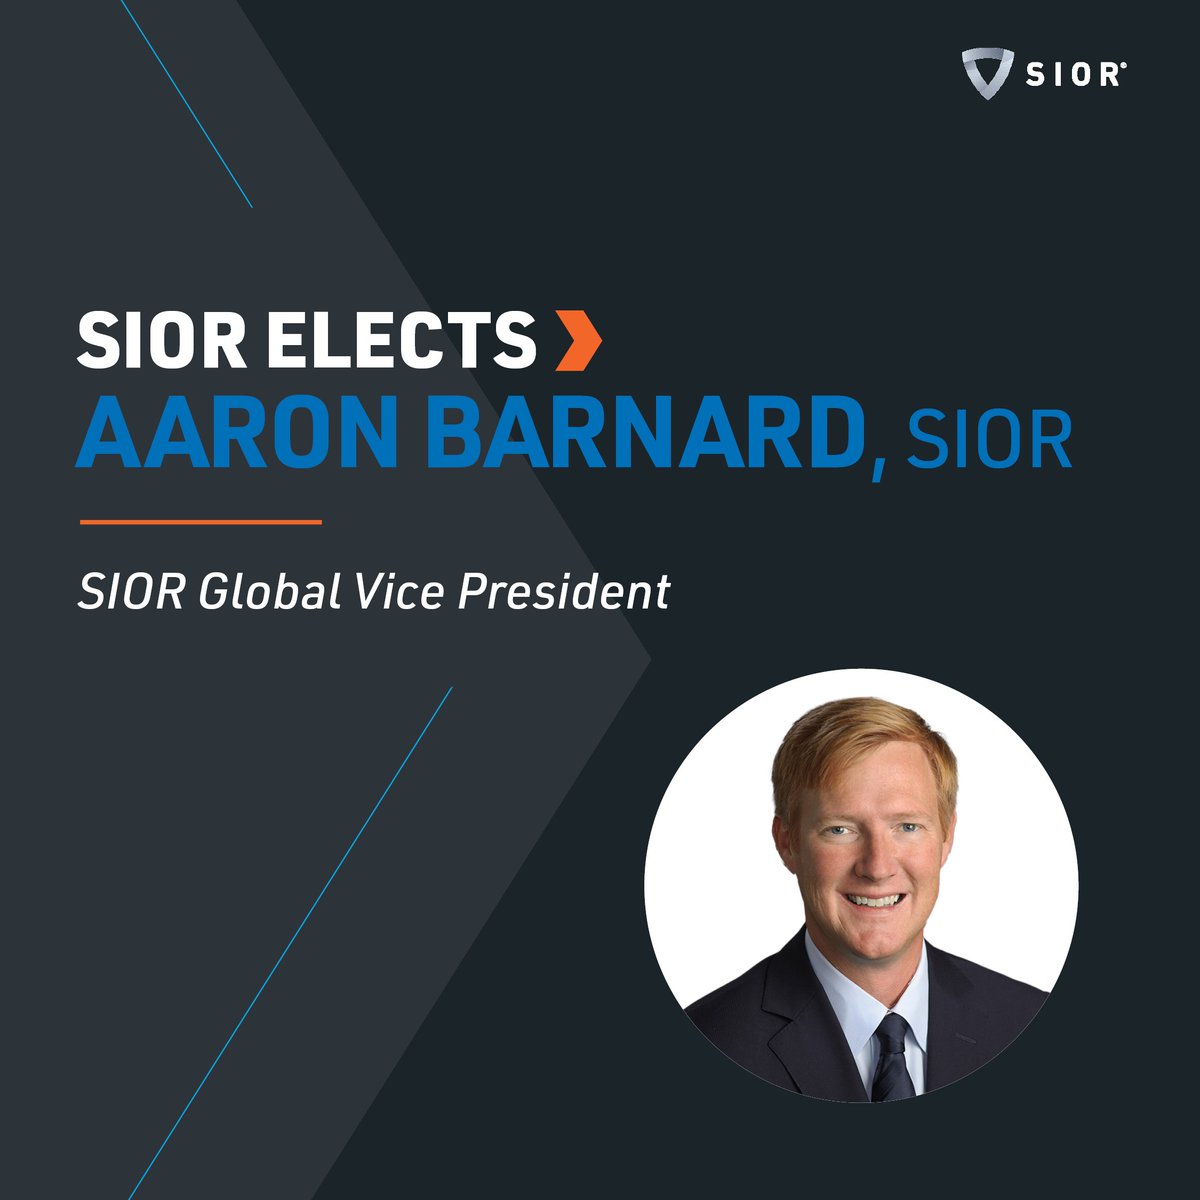 #SIOR is proud to announce that Aaron Barnard, SIOR, (@barnard_aaron) has been elected SIOR Vice President. His experience and expertise will be a tremendous asset to the organization when he's inducted this fall. Congratulations, Aaron! #CRE